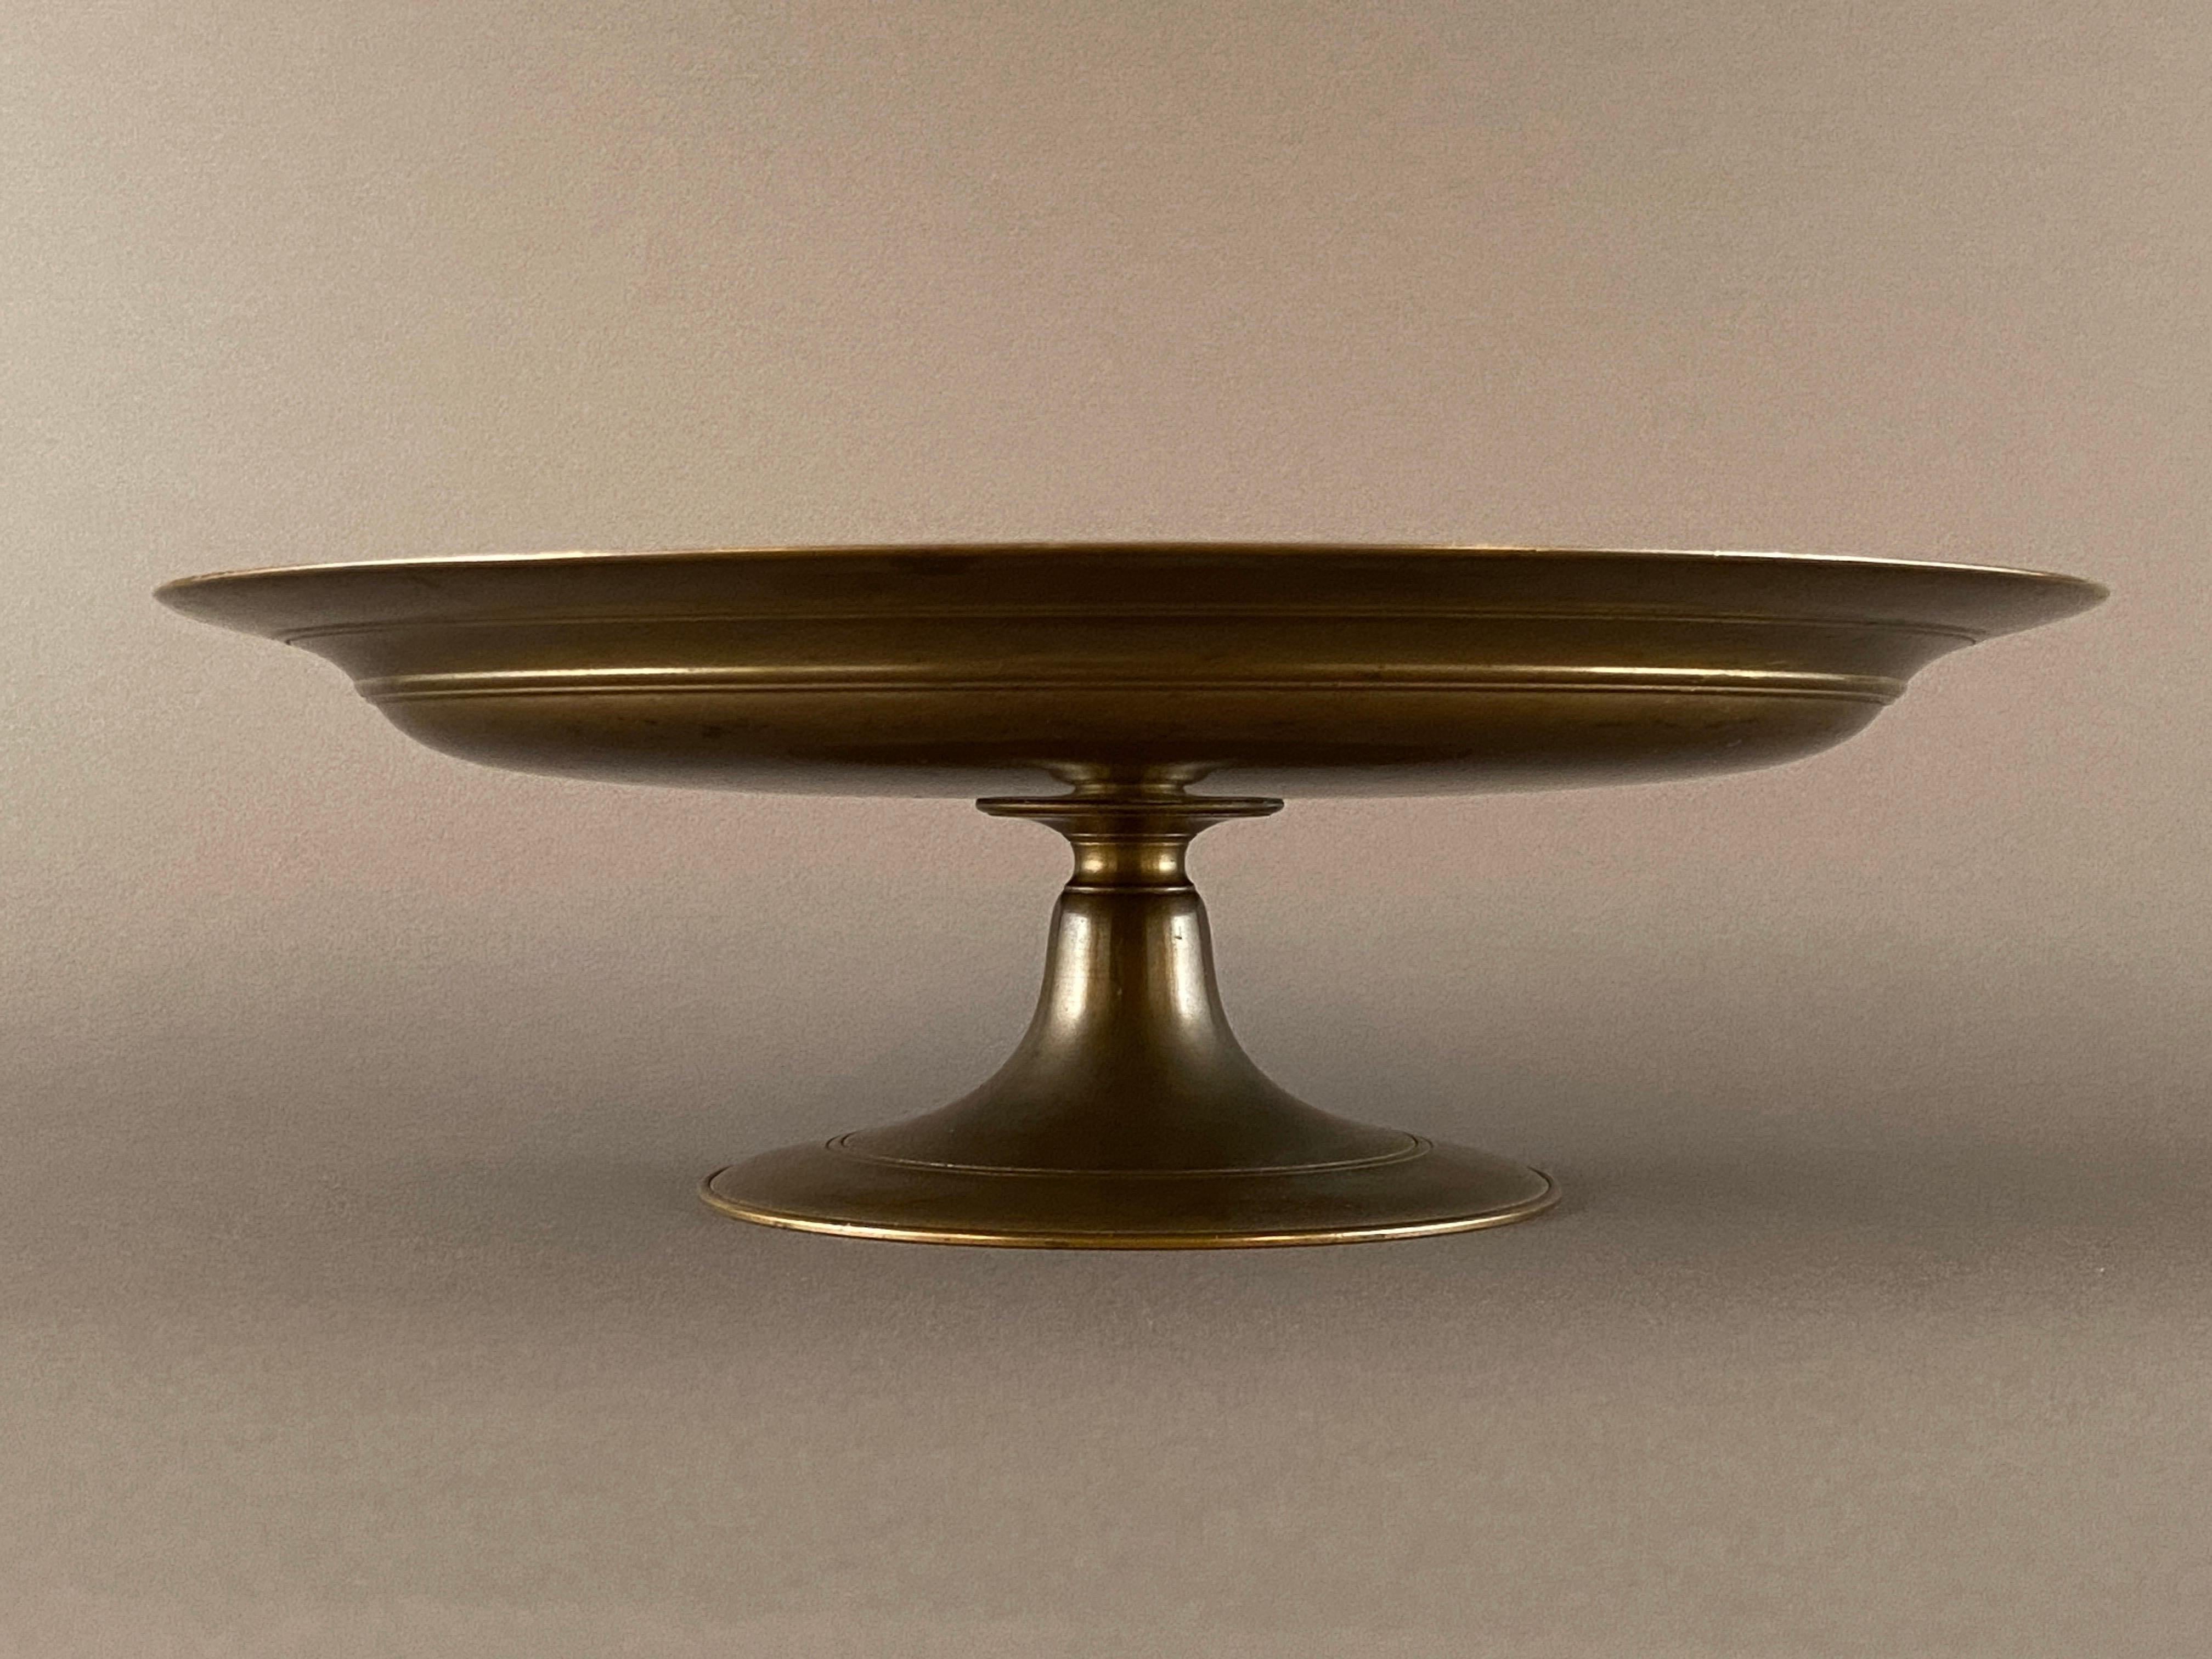 French 19th Century Tazza Cup in Gilt and Patinated Bronze by Levillain and Barbedienne